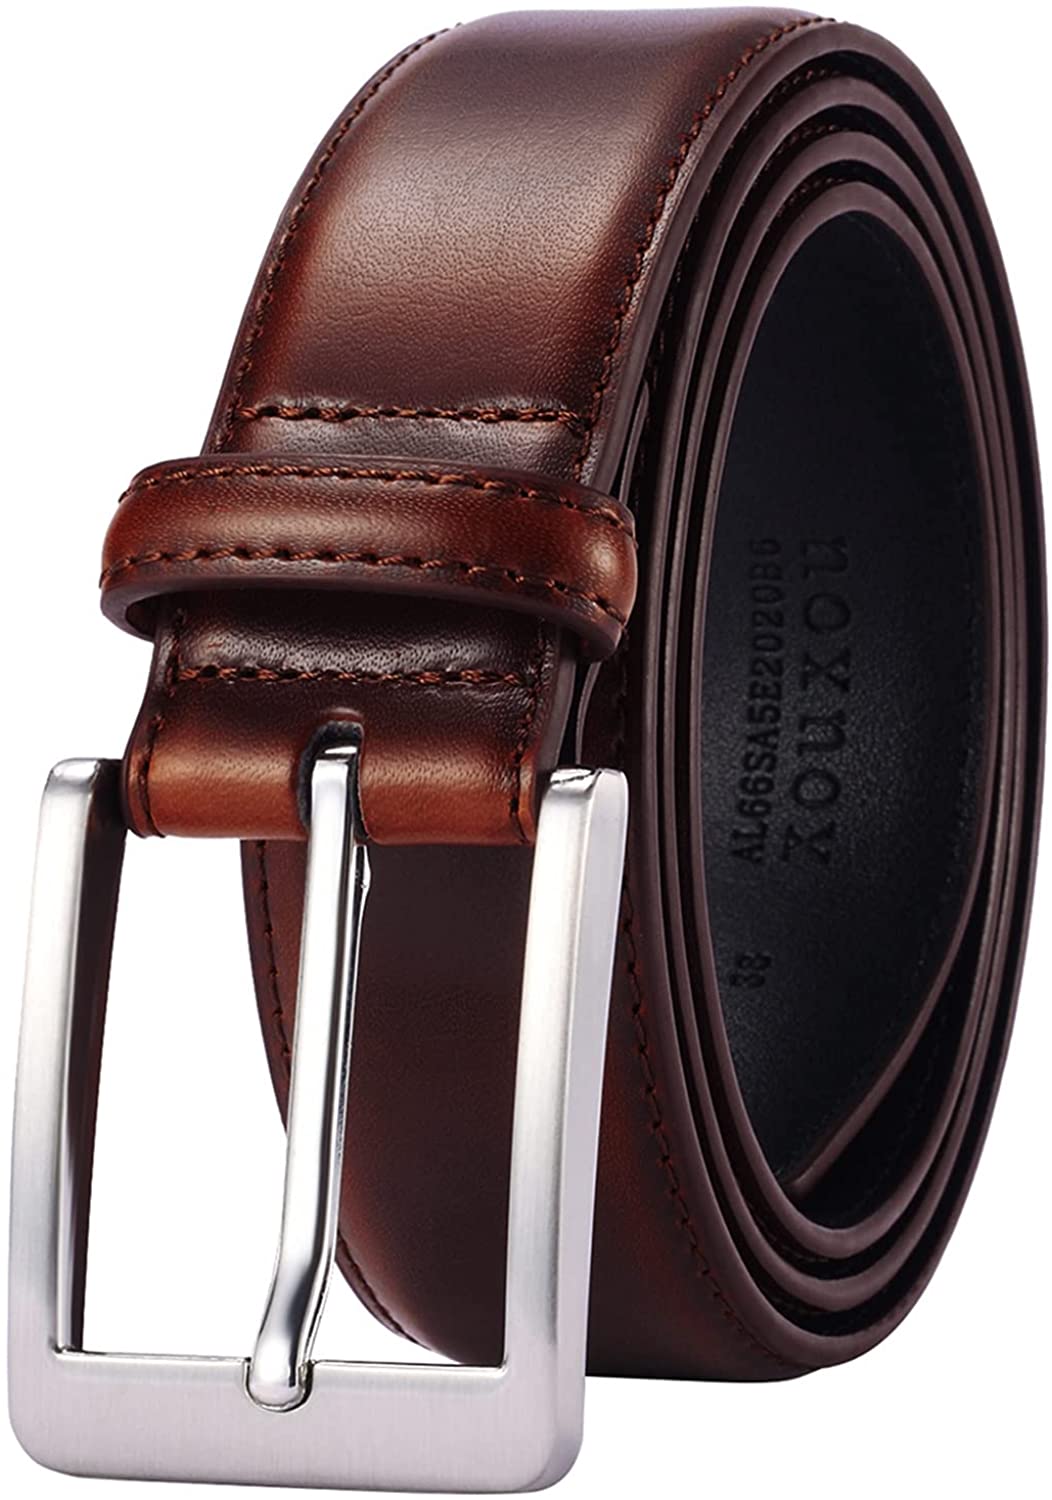 XOUXOU Men's Casual Leather Jeans Belts Classic Work Business Dress Belt  with Pr | eBay